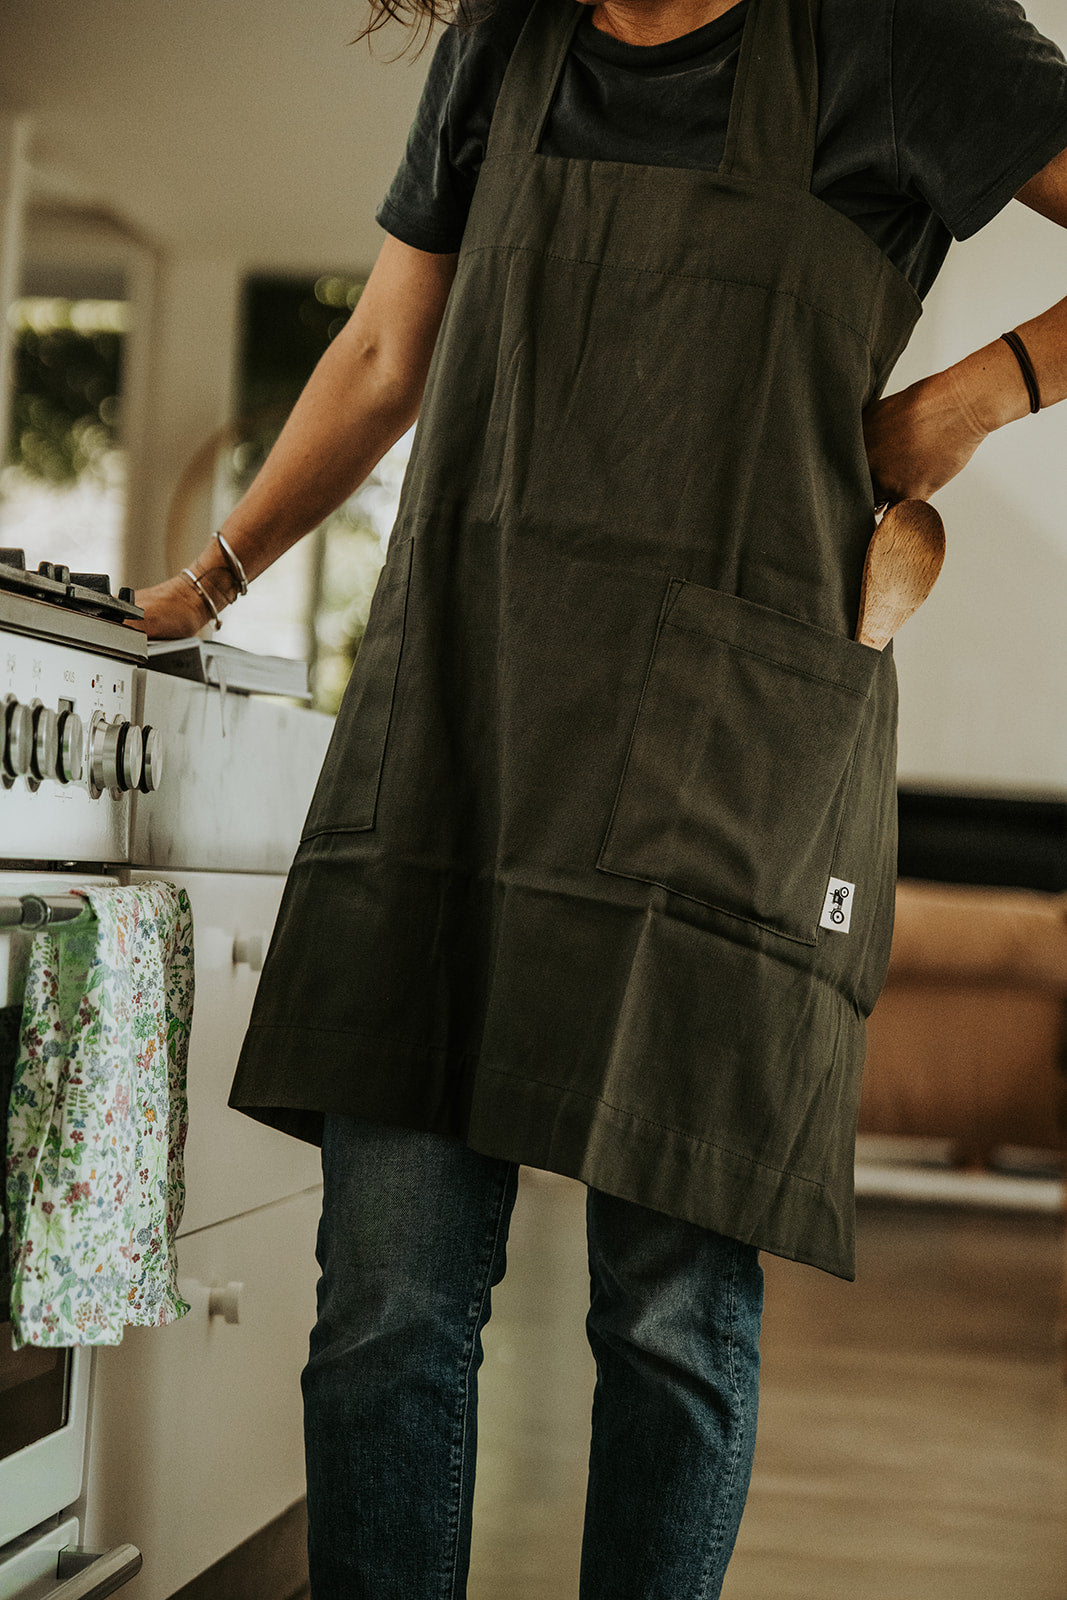 Ladies' Pinafore Apron in Forest Green